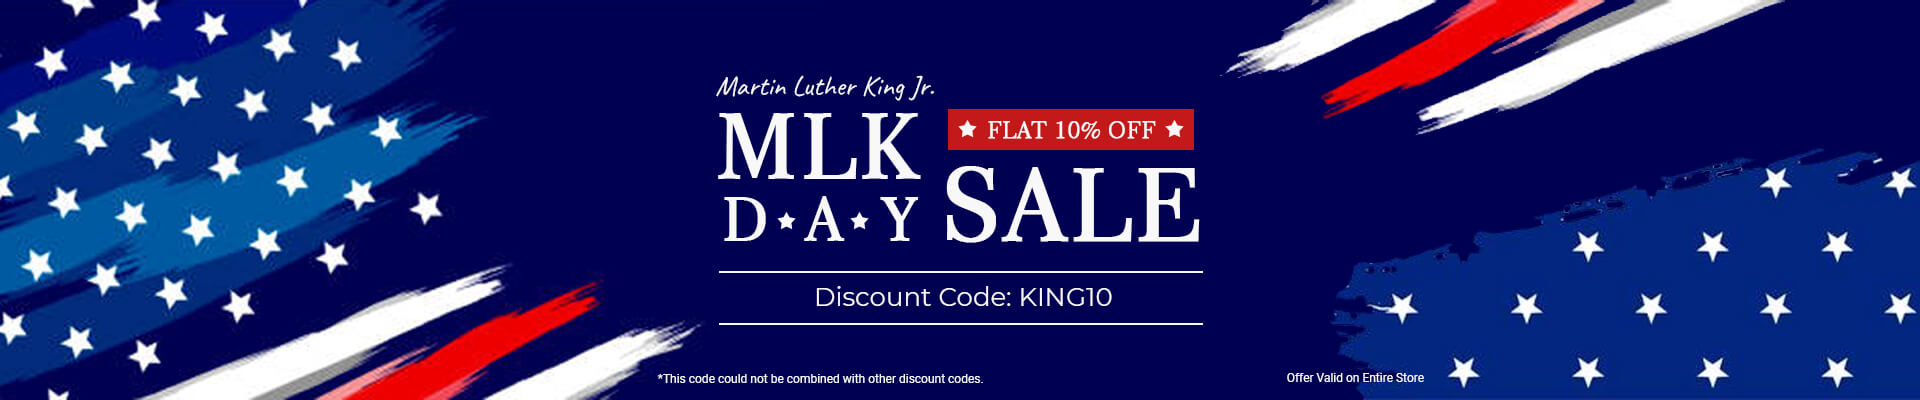 Martin Luther King Jr. Sale